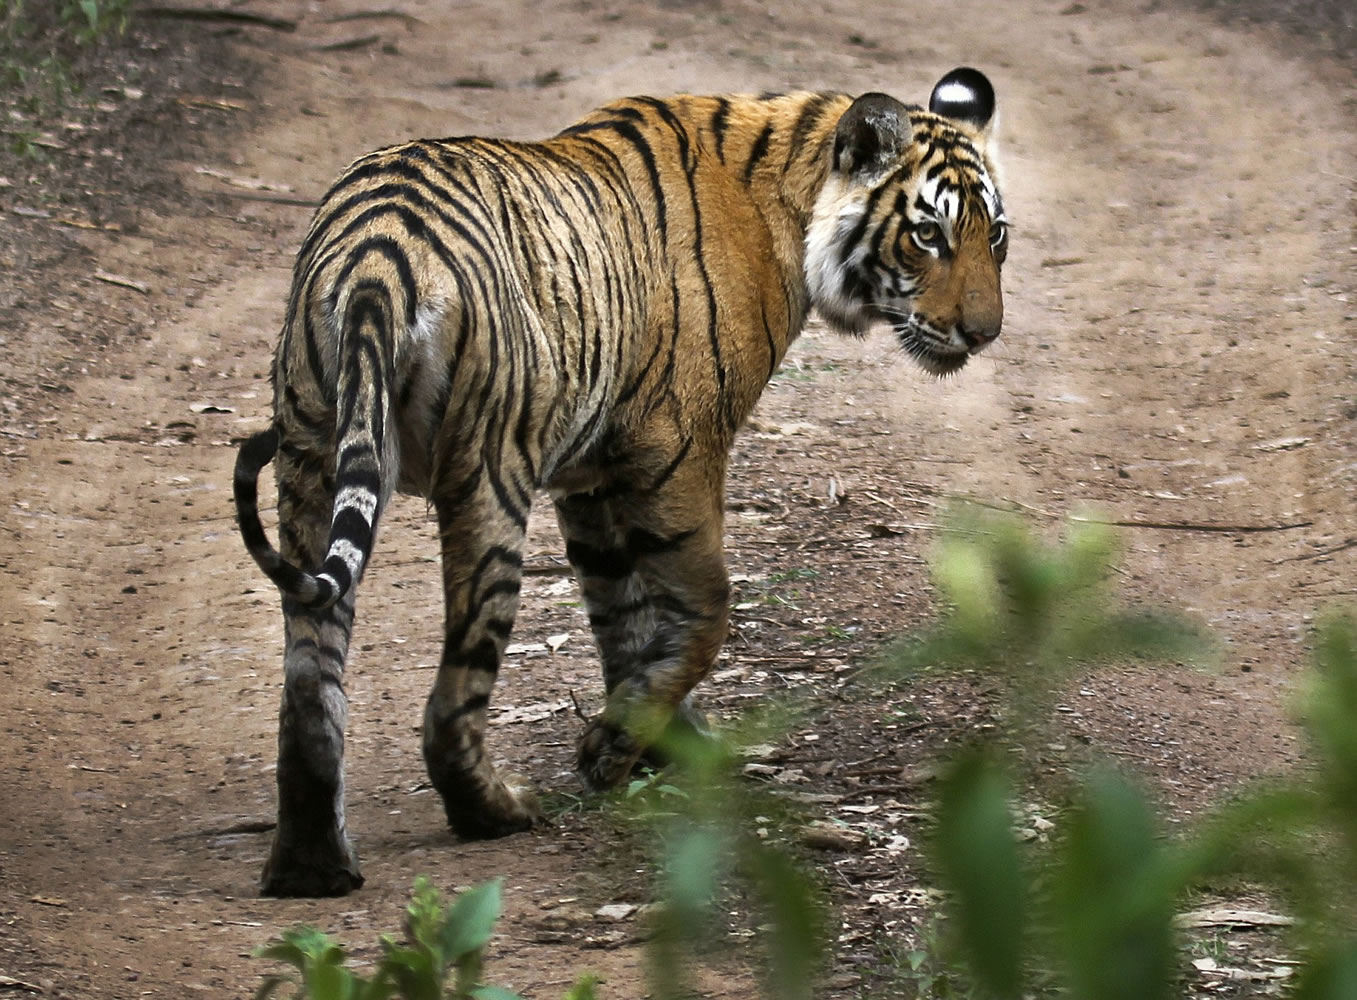 A tiger walks Sunday at the Ranthambore National Park in Sawai Madhopur, India. India's tiger population has gone up 30 percent in just four years. The government lauded the news as astonishing evidence of victory in conservation. But independent scientists say such an increase -- to 2,226 big cats -- in so short a time doesn't make sense. They worry an enthusiastic new government under Prime Minister Narendra Modi is misinterpreting the numbers, trumpeting false claims of a thriving tiger population that could hurt conservation in the long run.